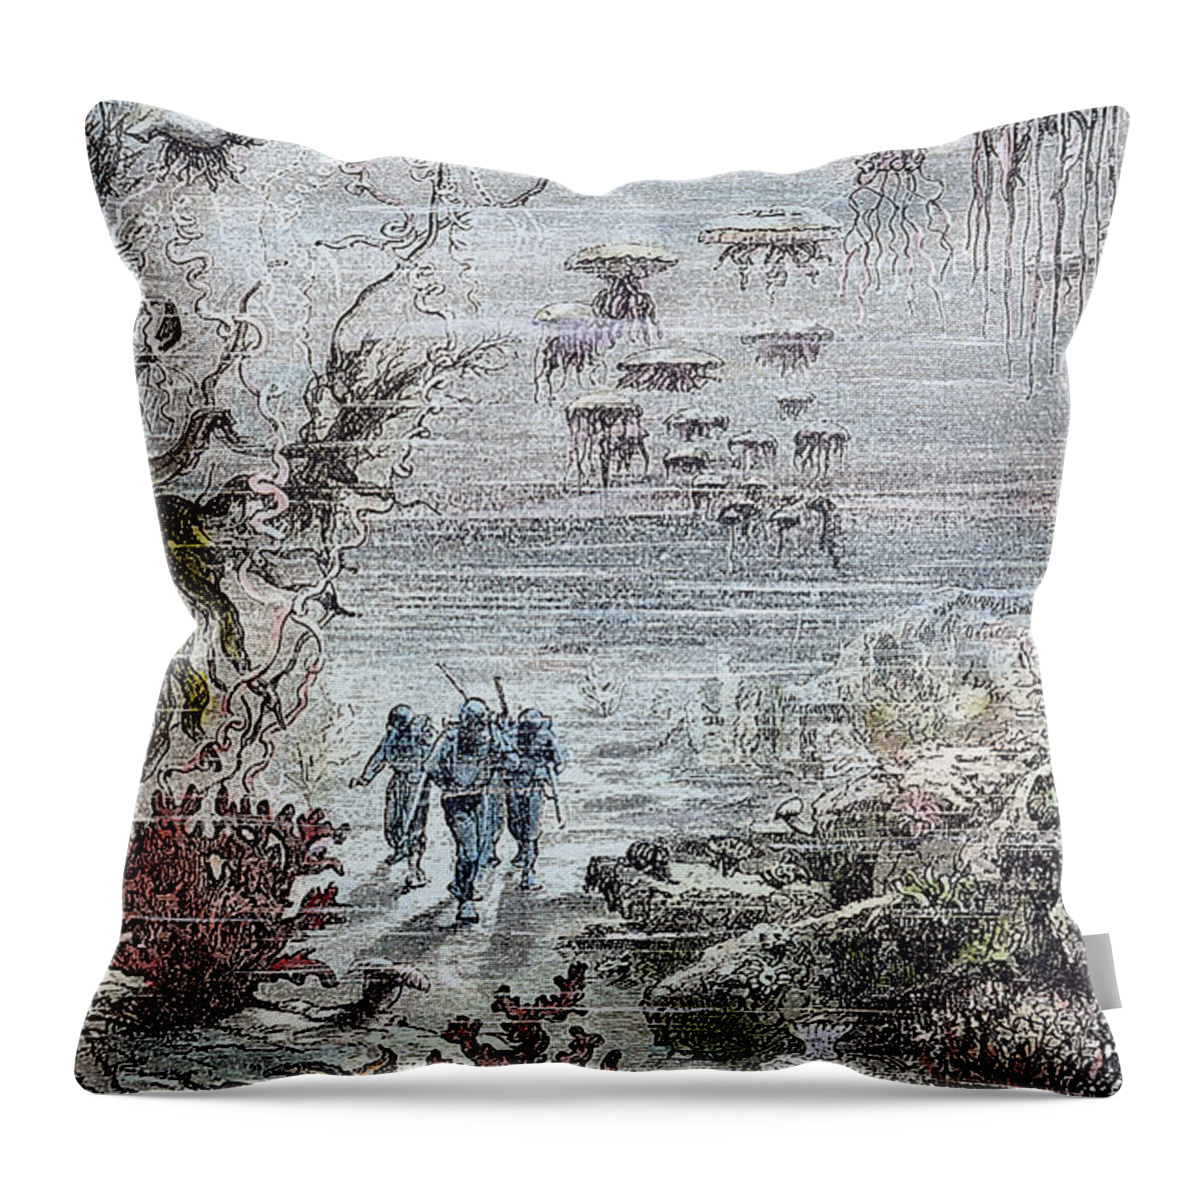 1870 Throw Pillow featuring the photograph Verne: 20,000 Leagues, 1870 #2 by Granger